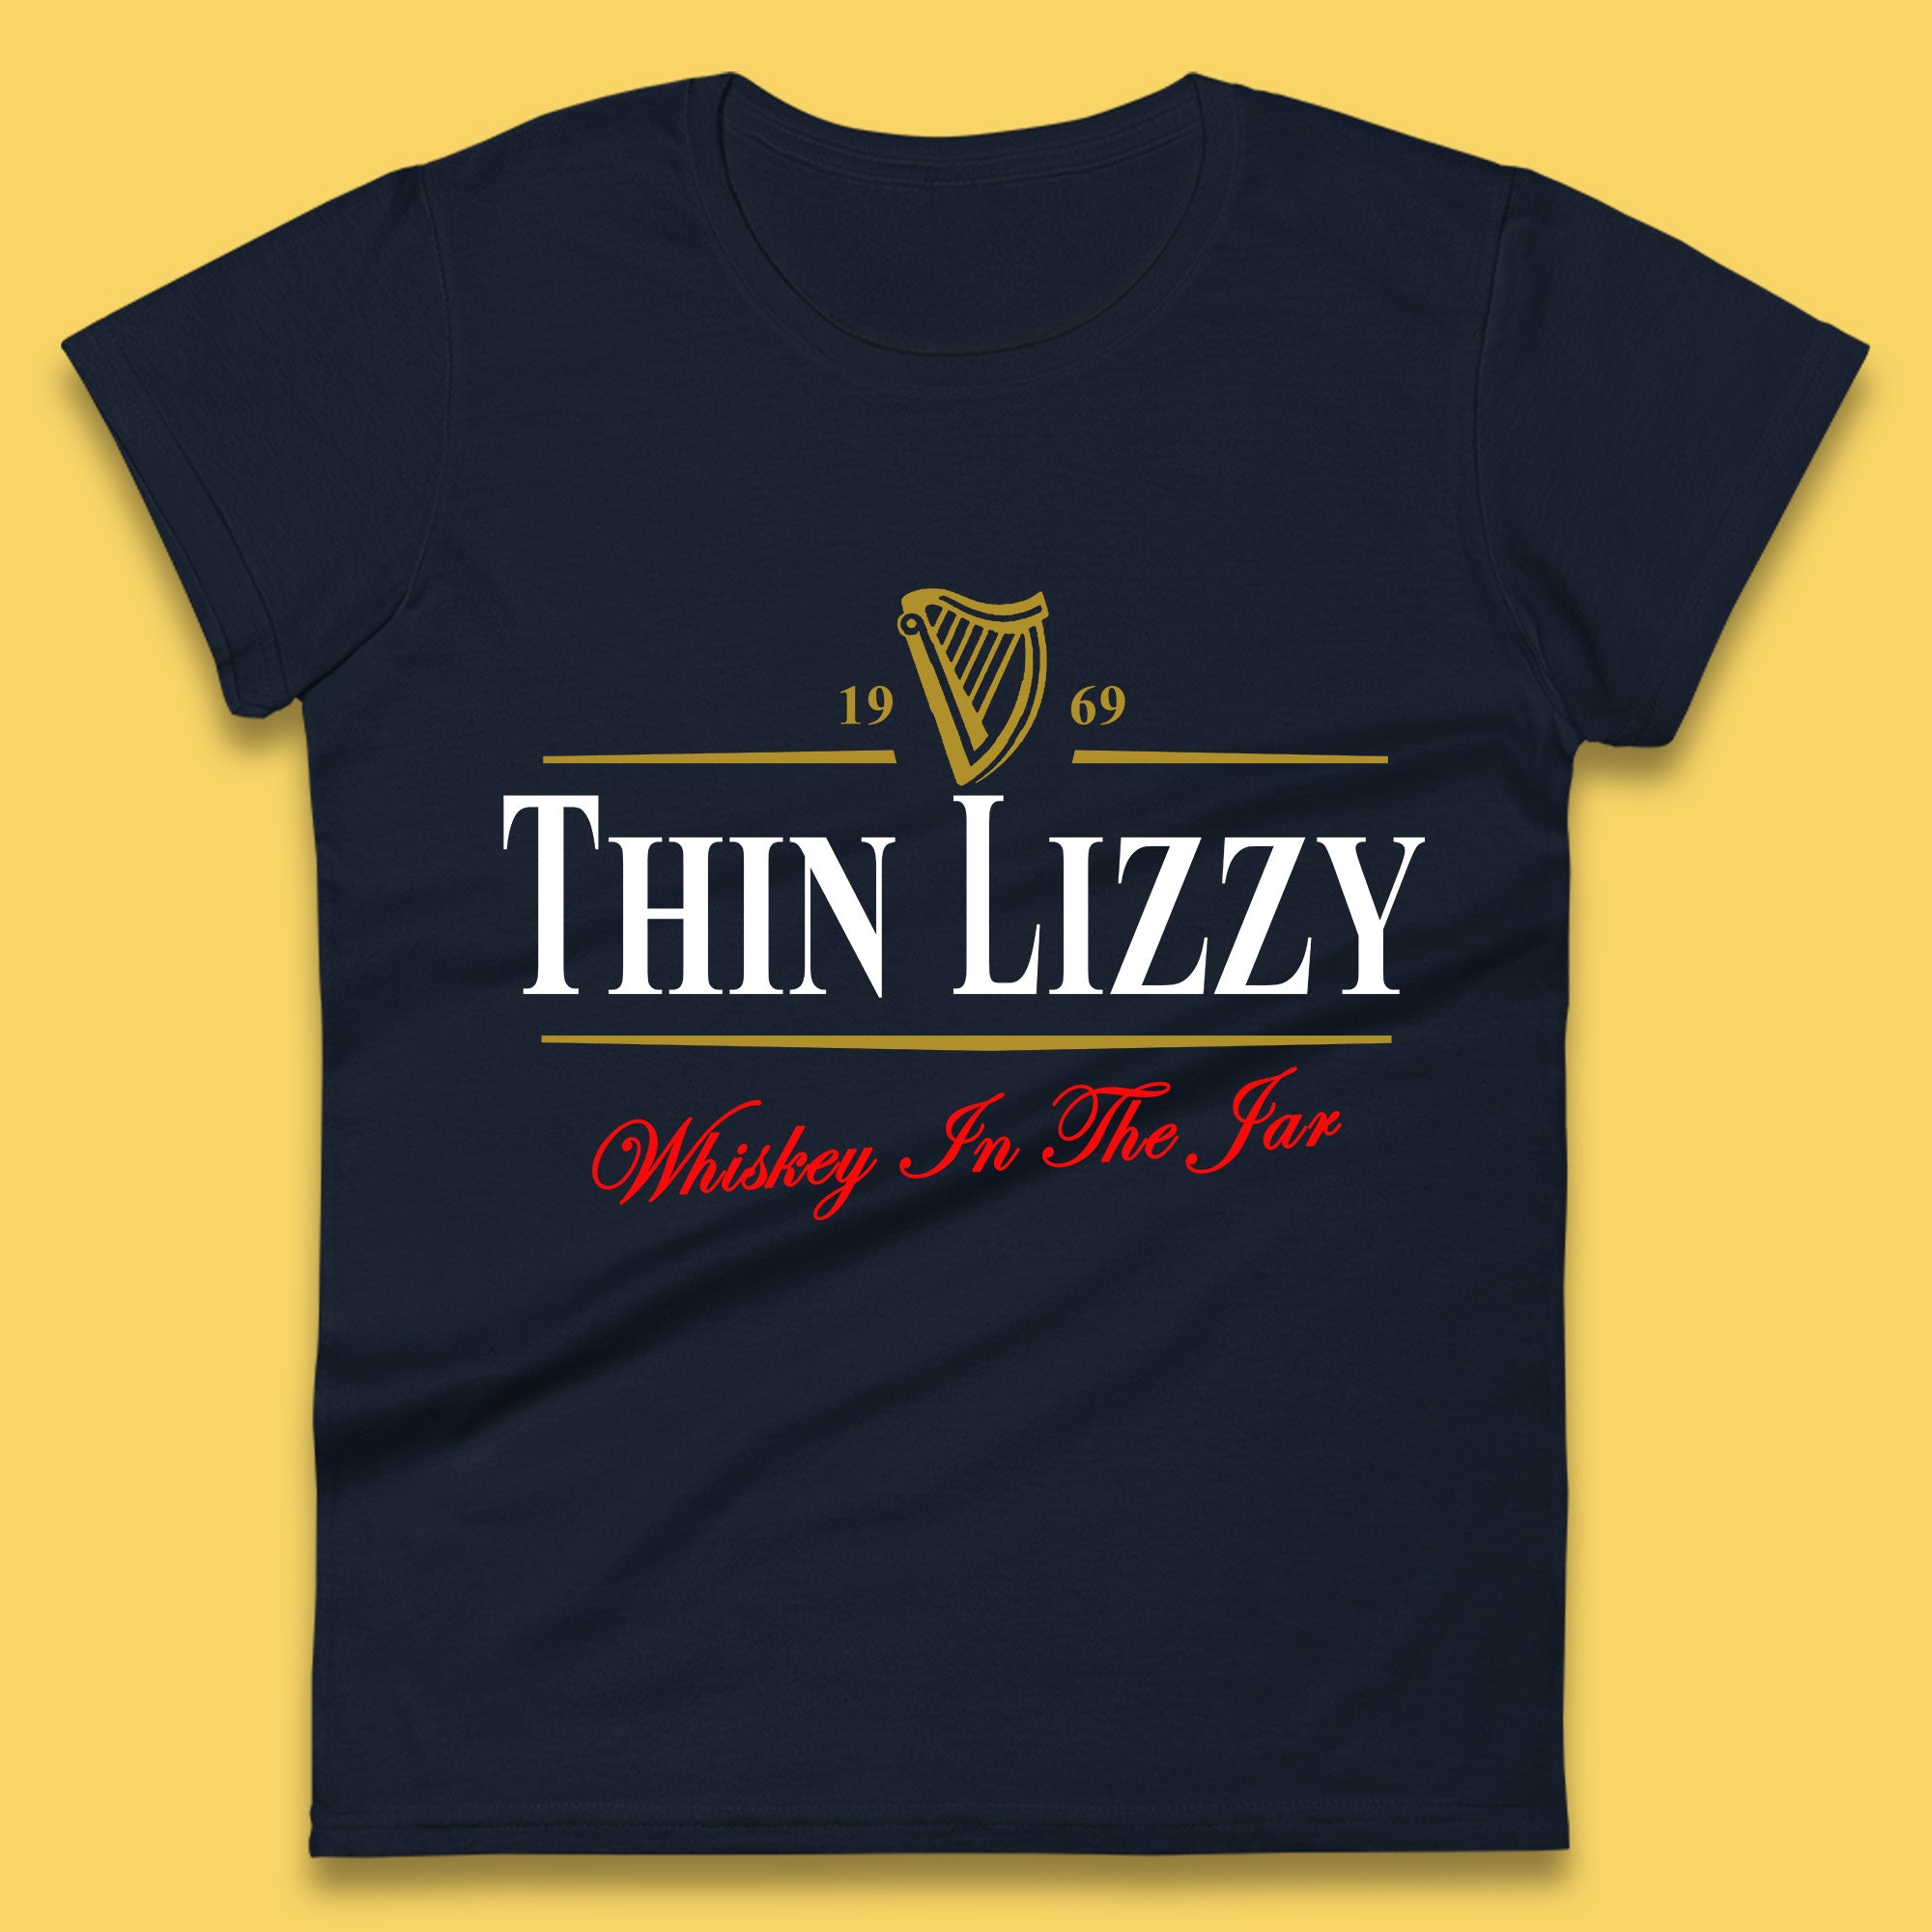 Thin Lizzy Irish Hard Rock Band Whiskey In The Jar Song By Thin Lizzy Irish Traditional Song Womens Tee Top